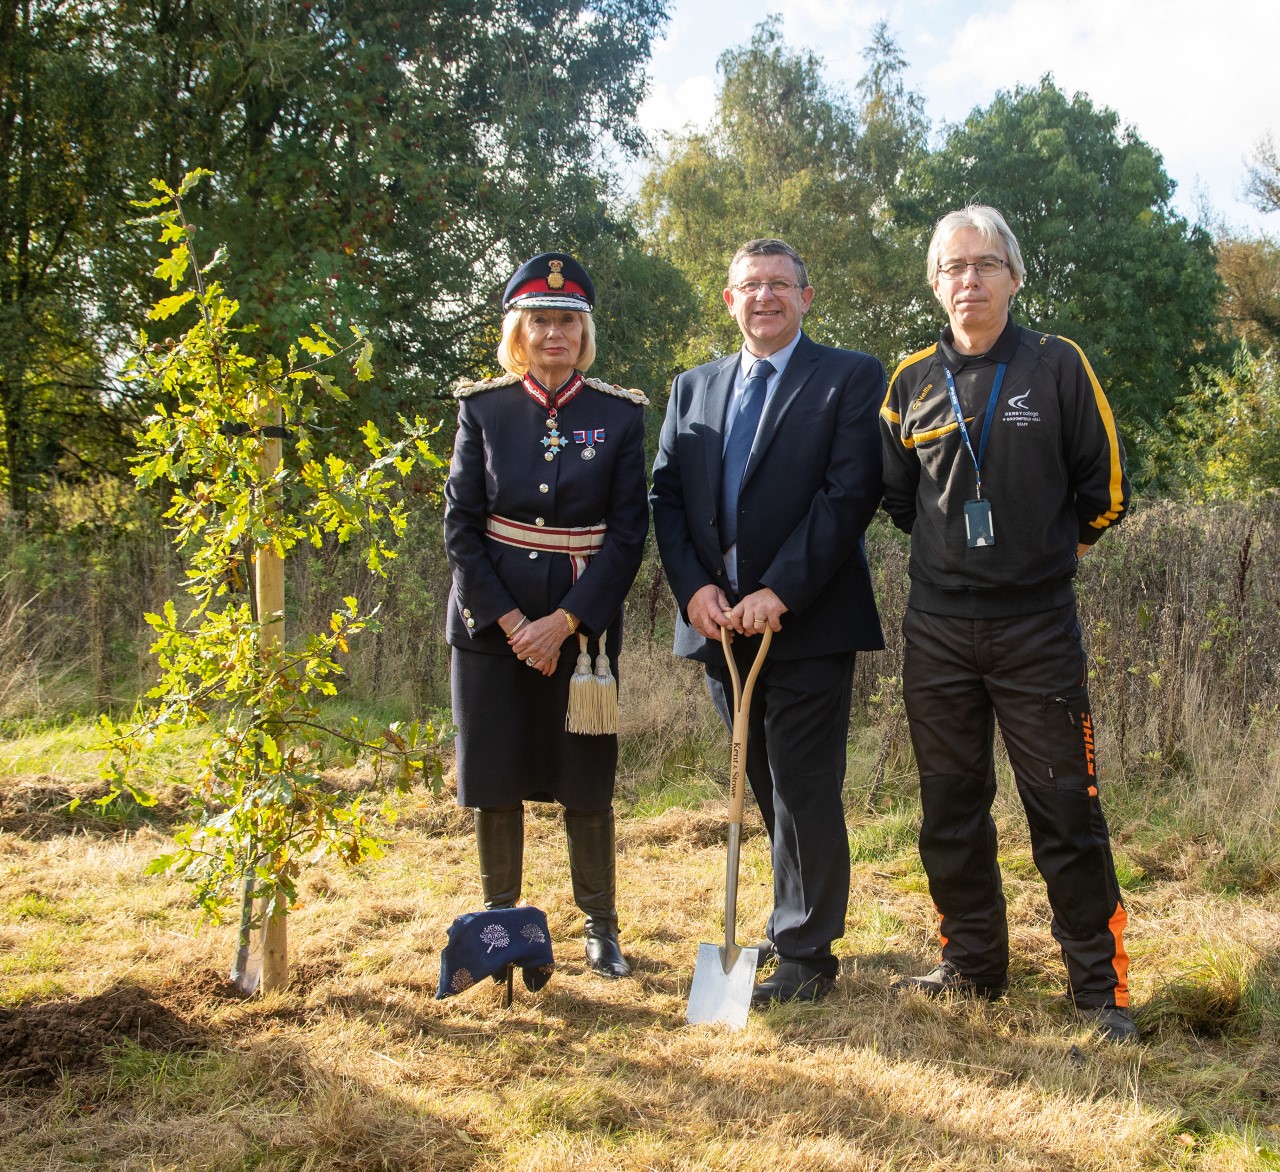 Jon Collins with the Lord Lieutenant of Derbyshire, Mrs Elizabeth Fothergill CBE, and Paul Foskett, Teacher of Countryside and Arboriculture